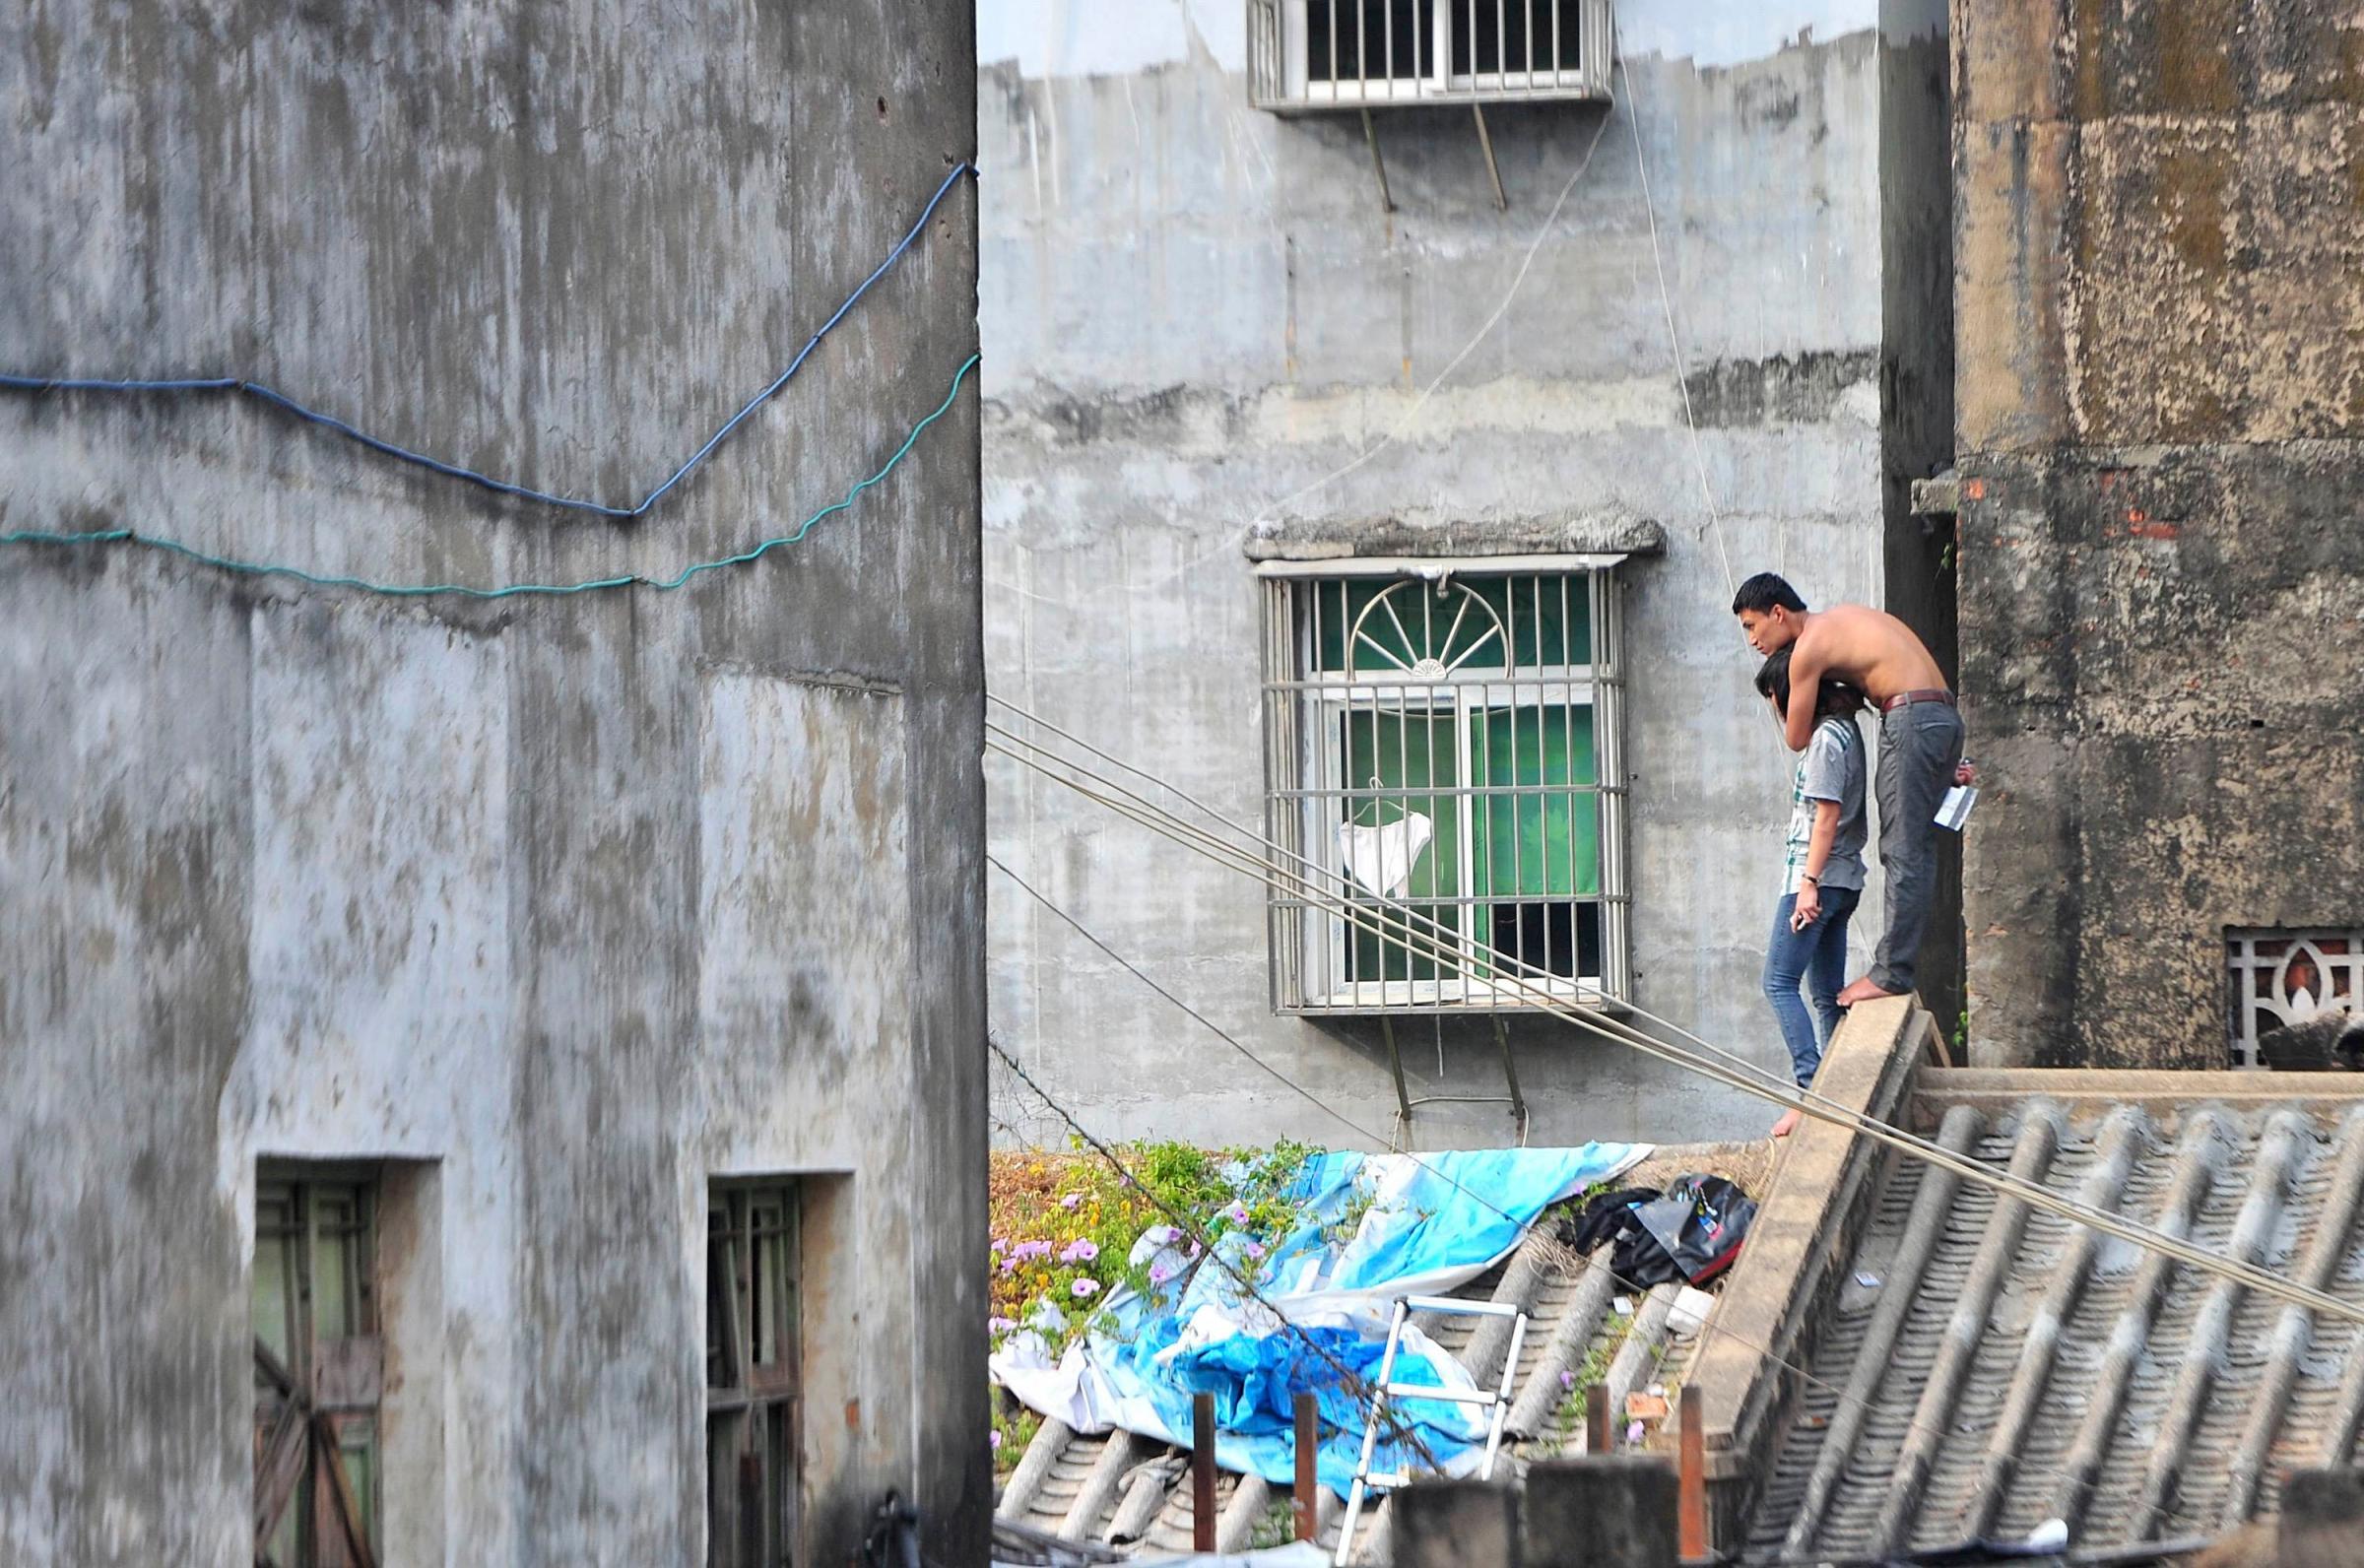 A topless man holds his girlfriend hostage with a knife atop a residential building in Sanya, Hainan province, Jan. 20, 2014. According to local media, the man, surnamed Lin, held his girlfriend hostage to threaten both families into allowing their marriage. Lin stood off with police on the roof for several hours and was arrested soon after he got down the building.